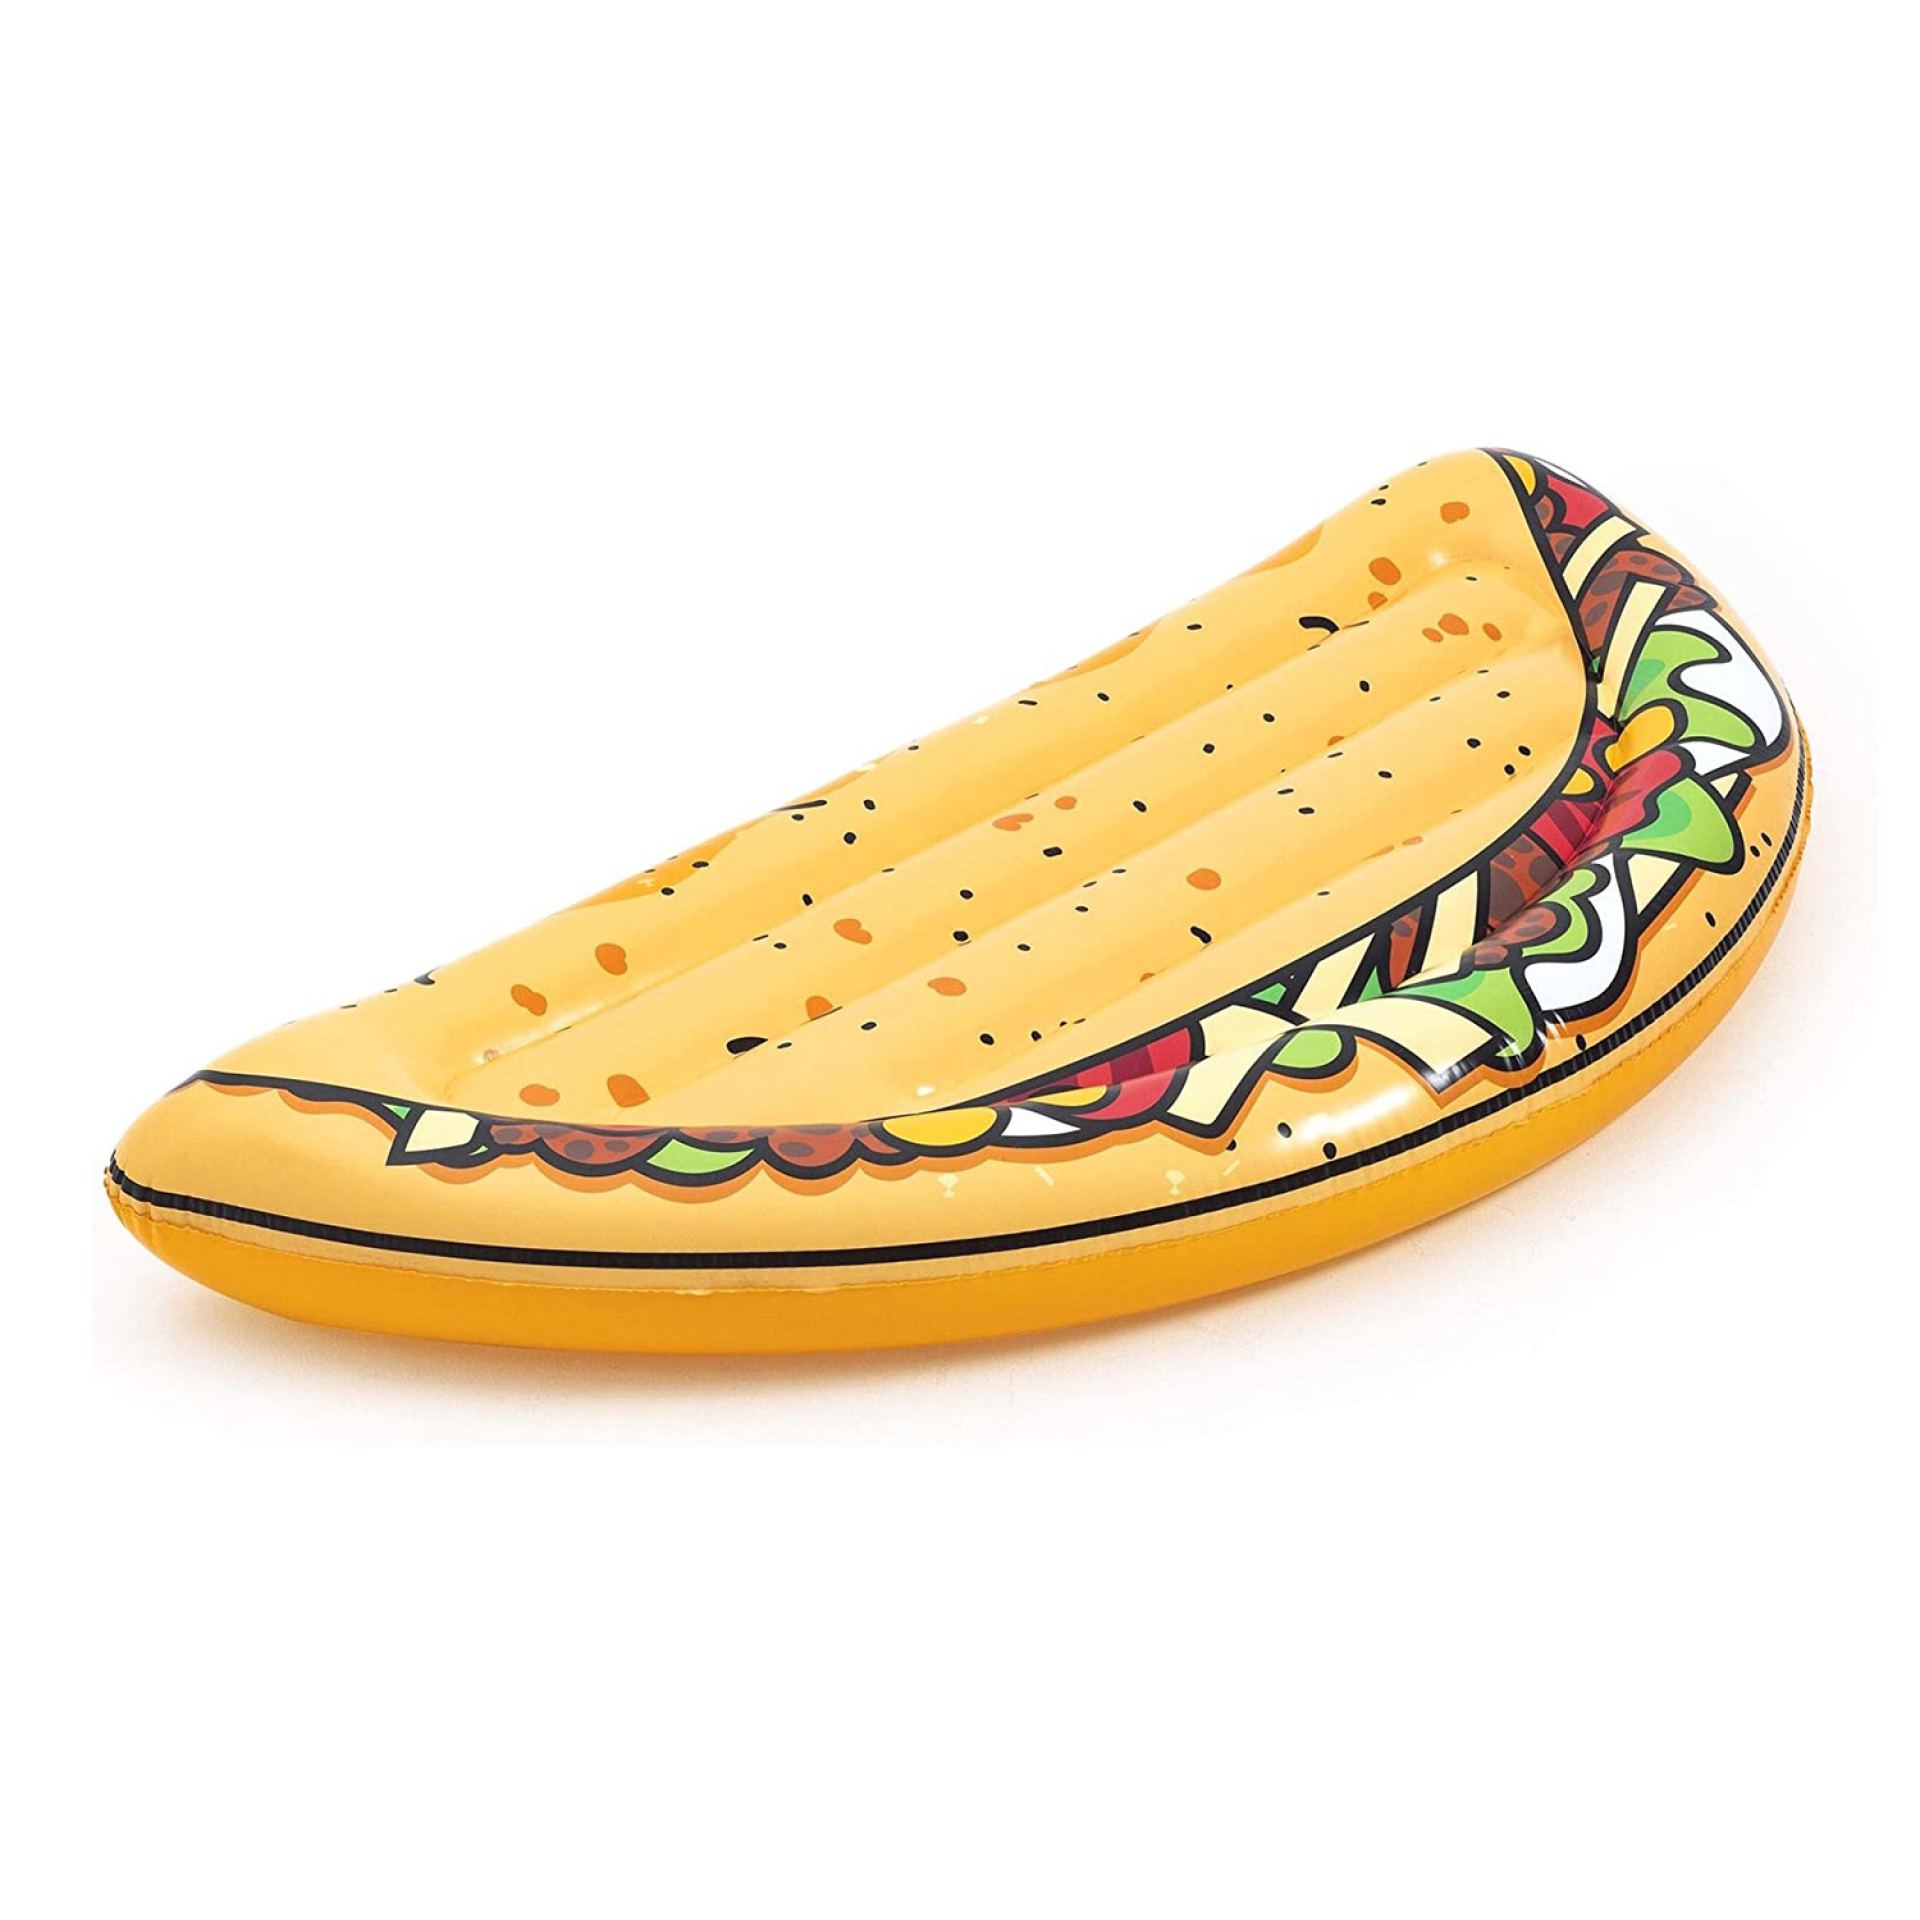 Bestway luchtbed taco party 171cm x 89cm